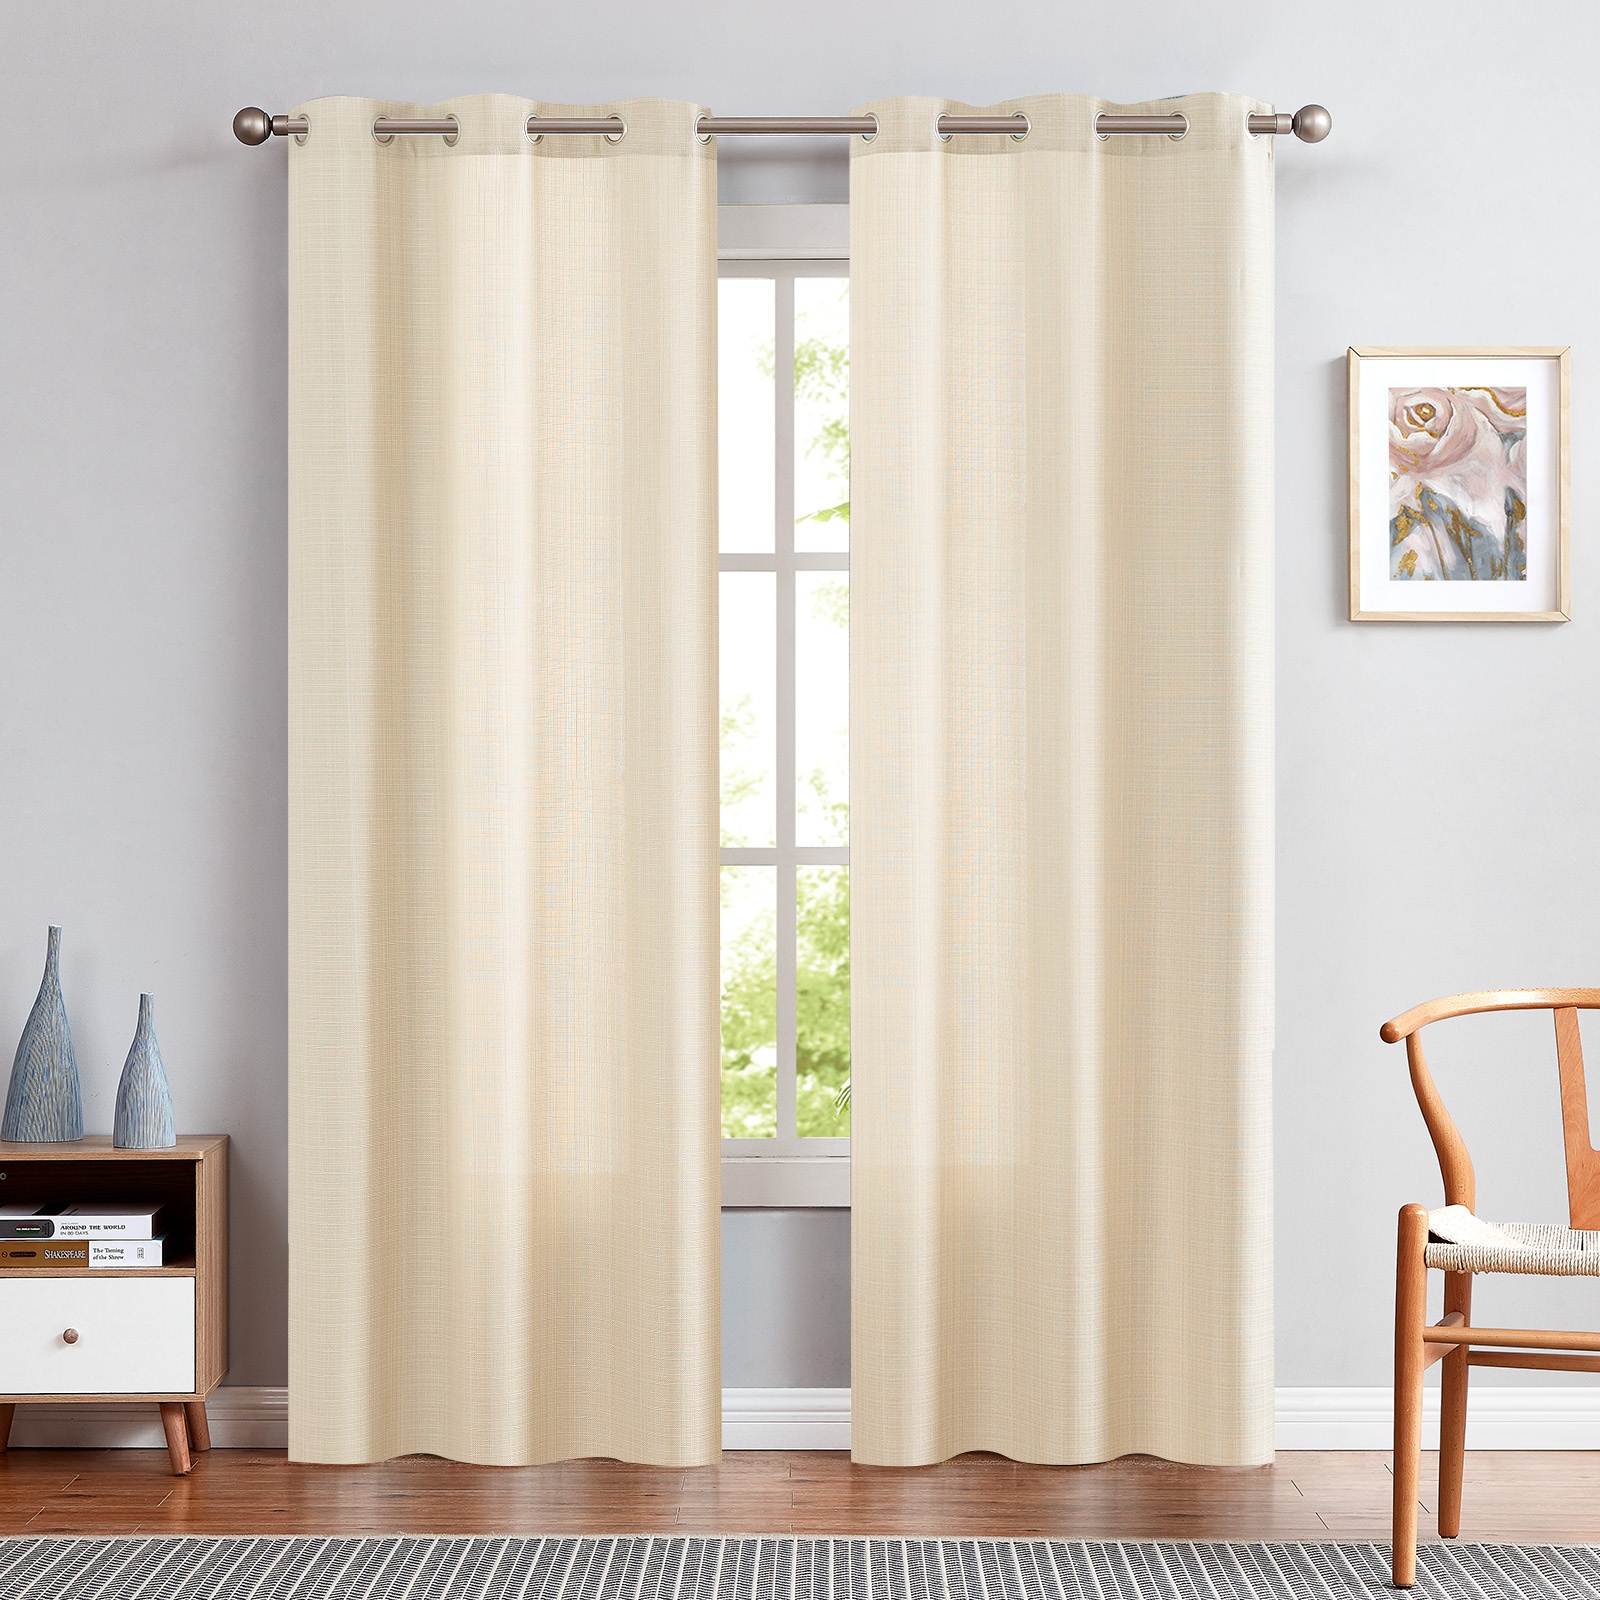 CURTAINKING Linen Textured Curtains 84 inches Beige Bedroom Living Room Window Curtain Set Light Filtering Drapes Grommet Top 2 Panels - image 2 of 8